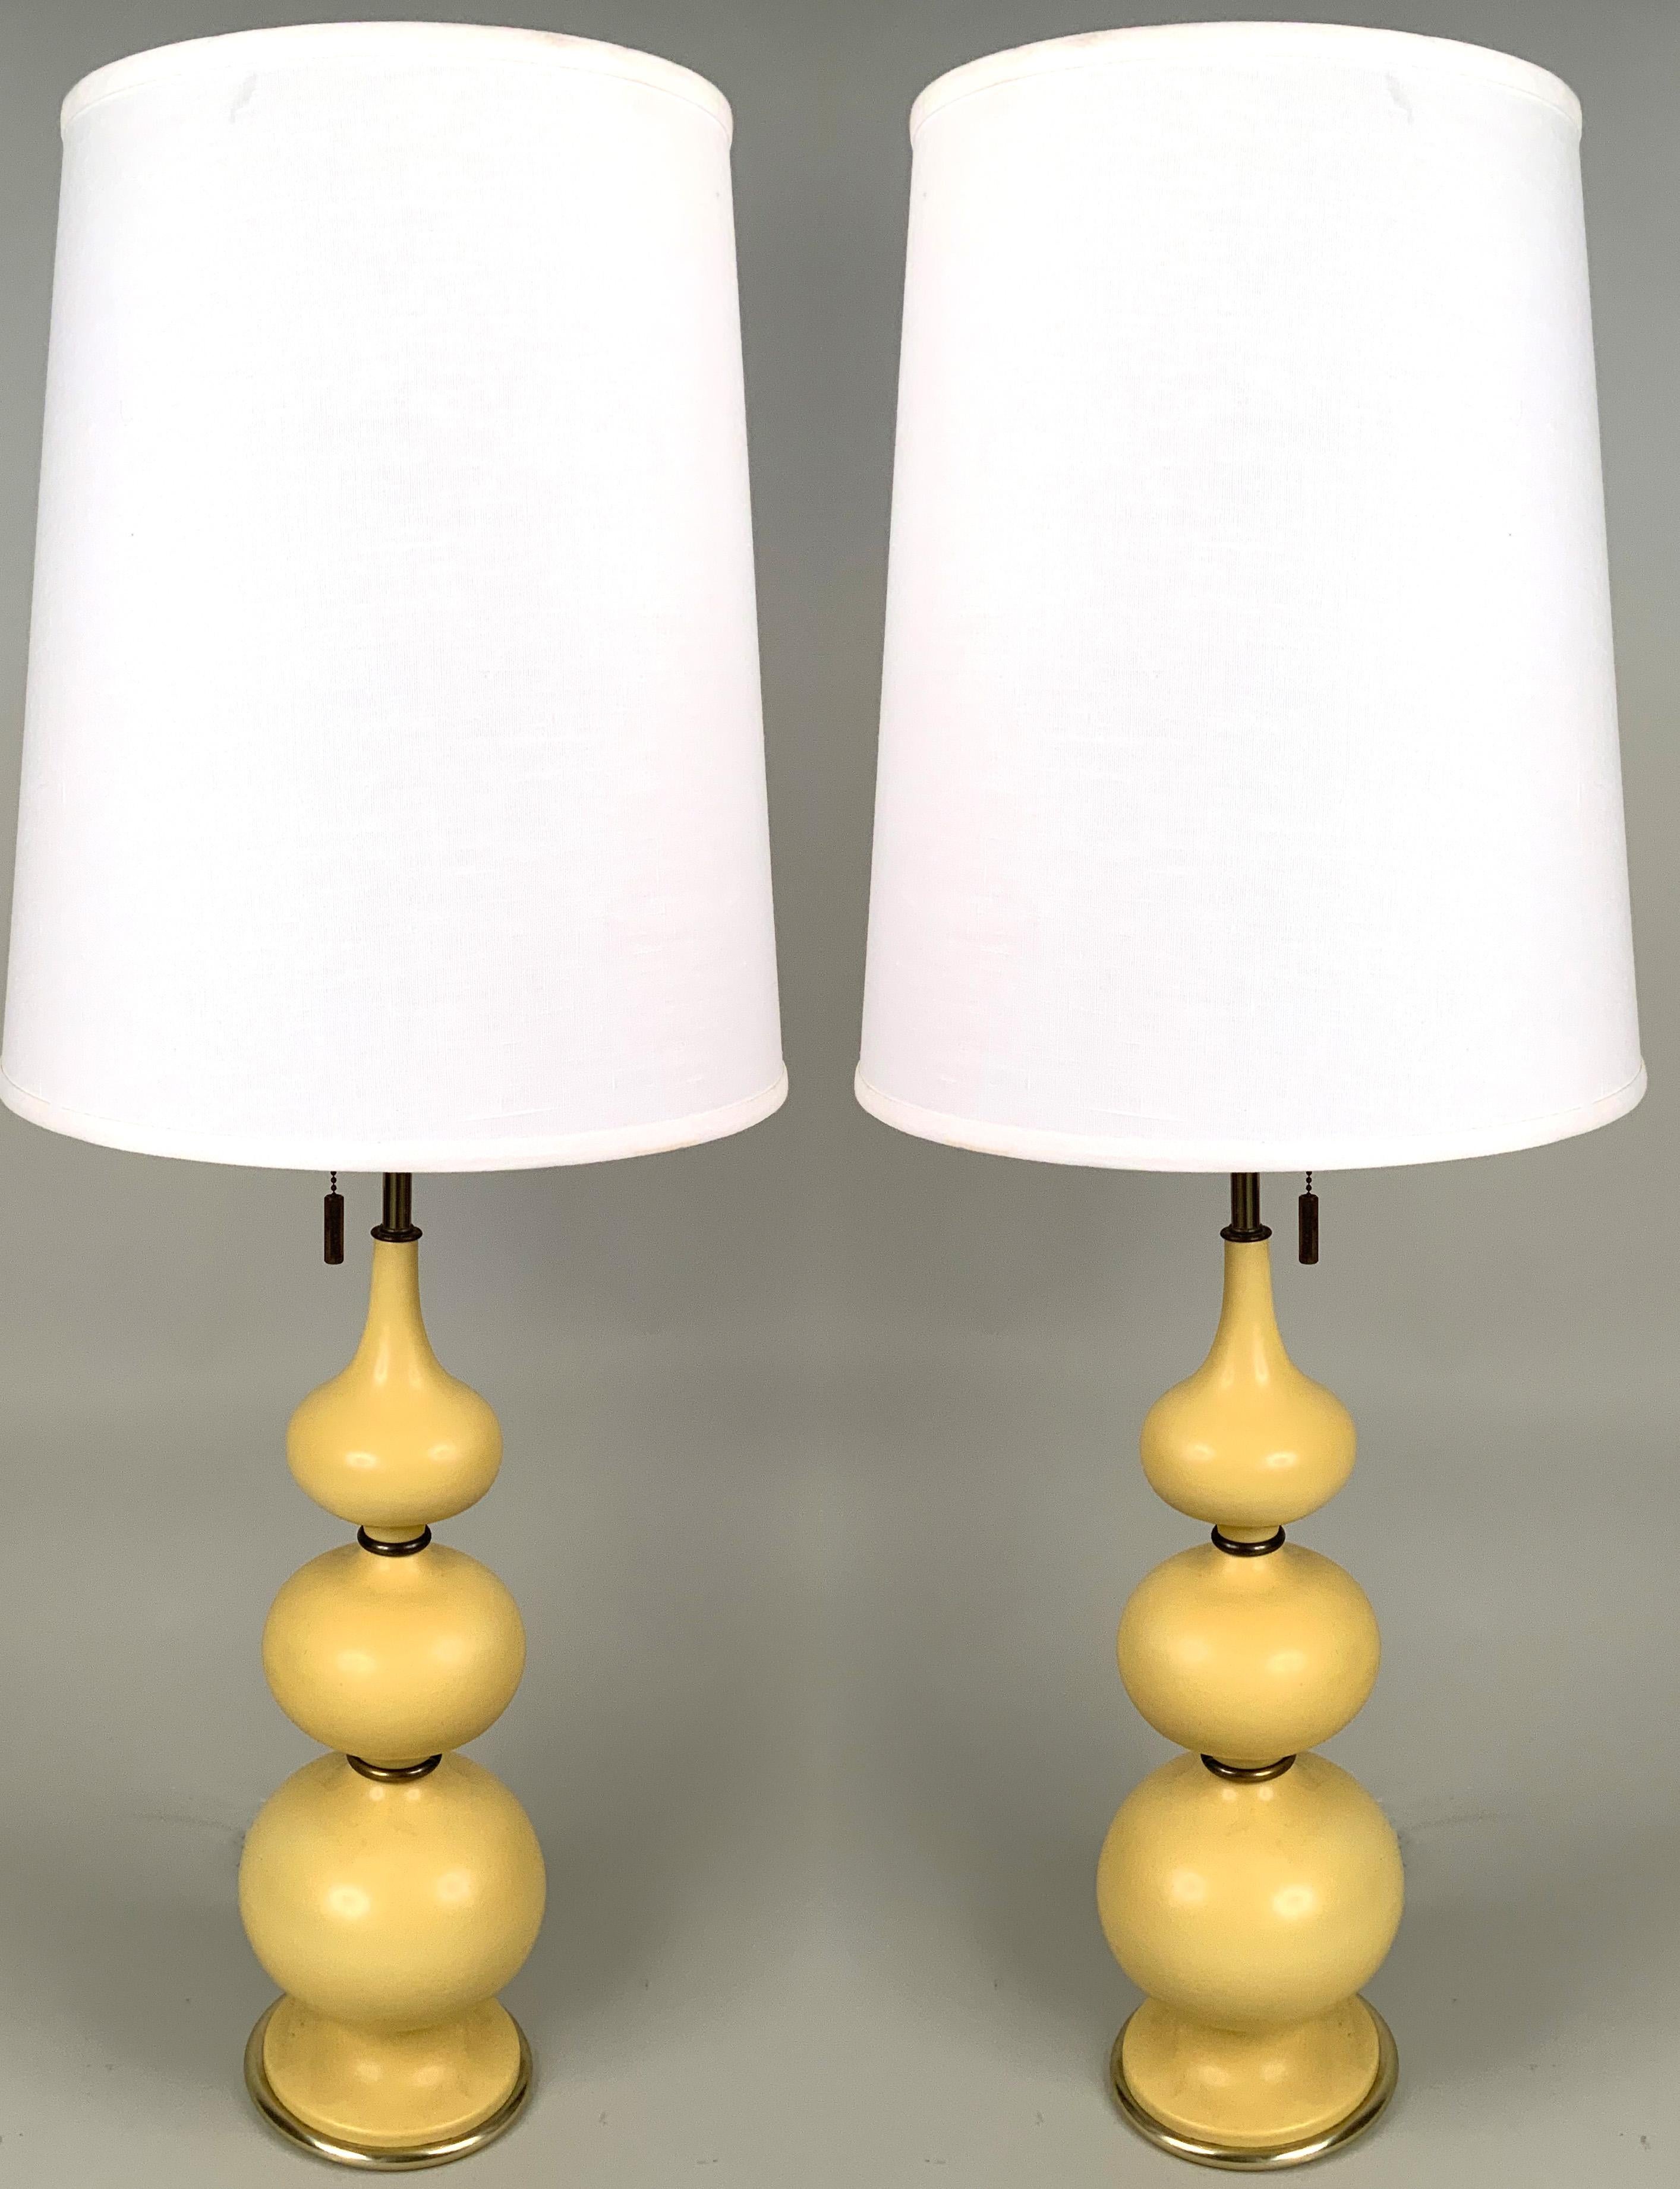 Mid-Century Modern Pair of 1960s Ceramic Lamps by Gerald Thurston for Lightolier